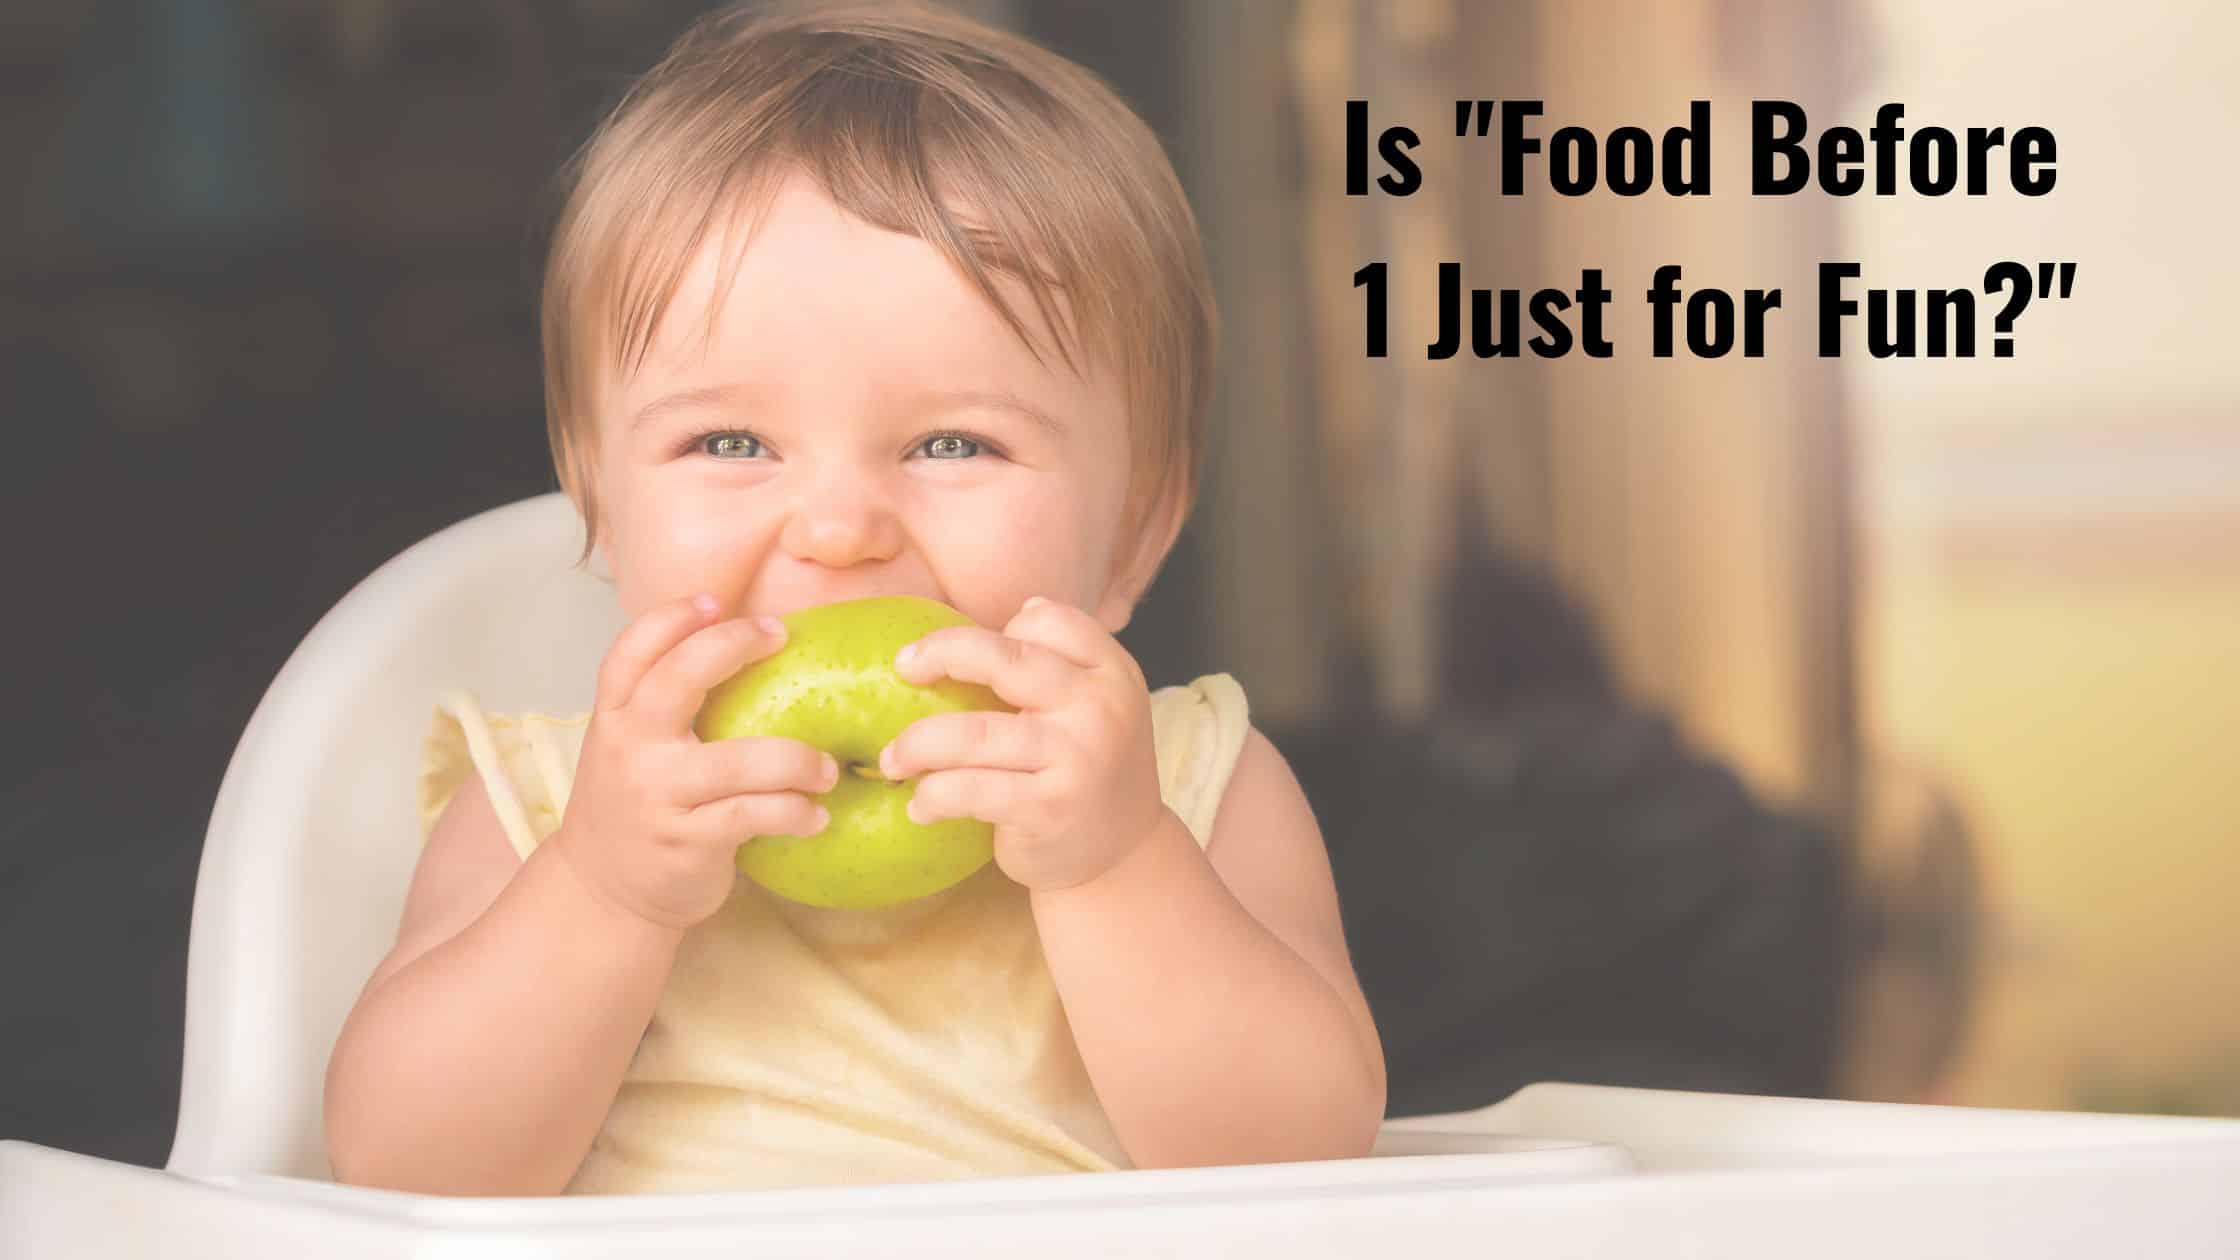 Baby eating: is food before 1 just for fun?